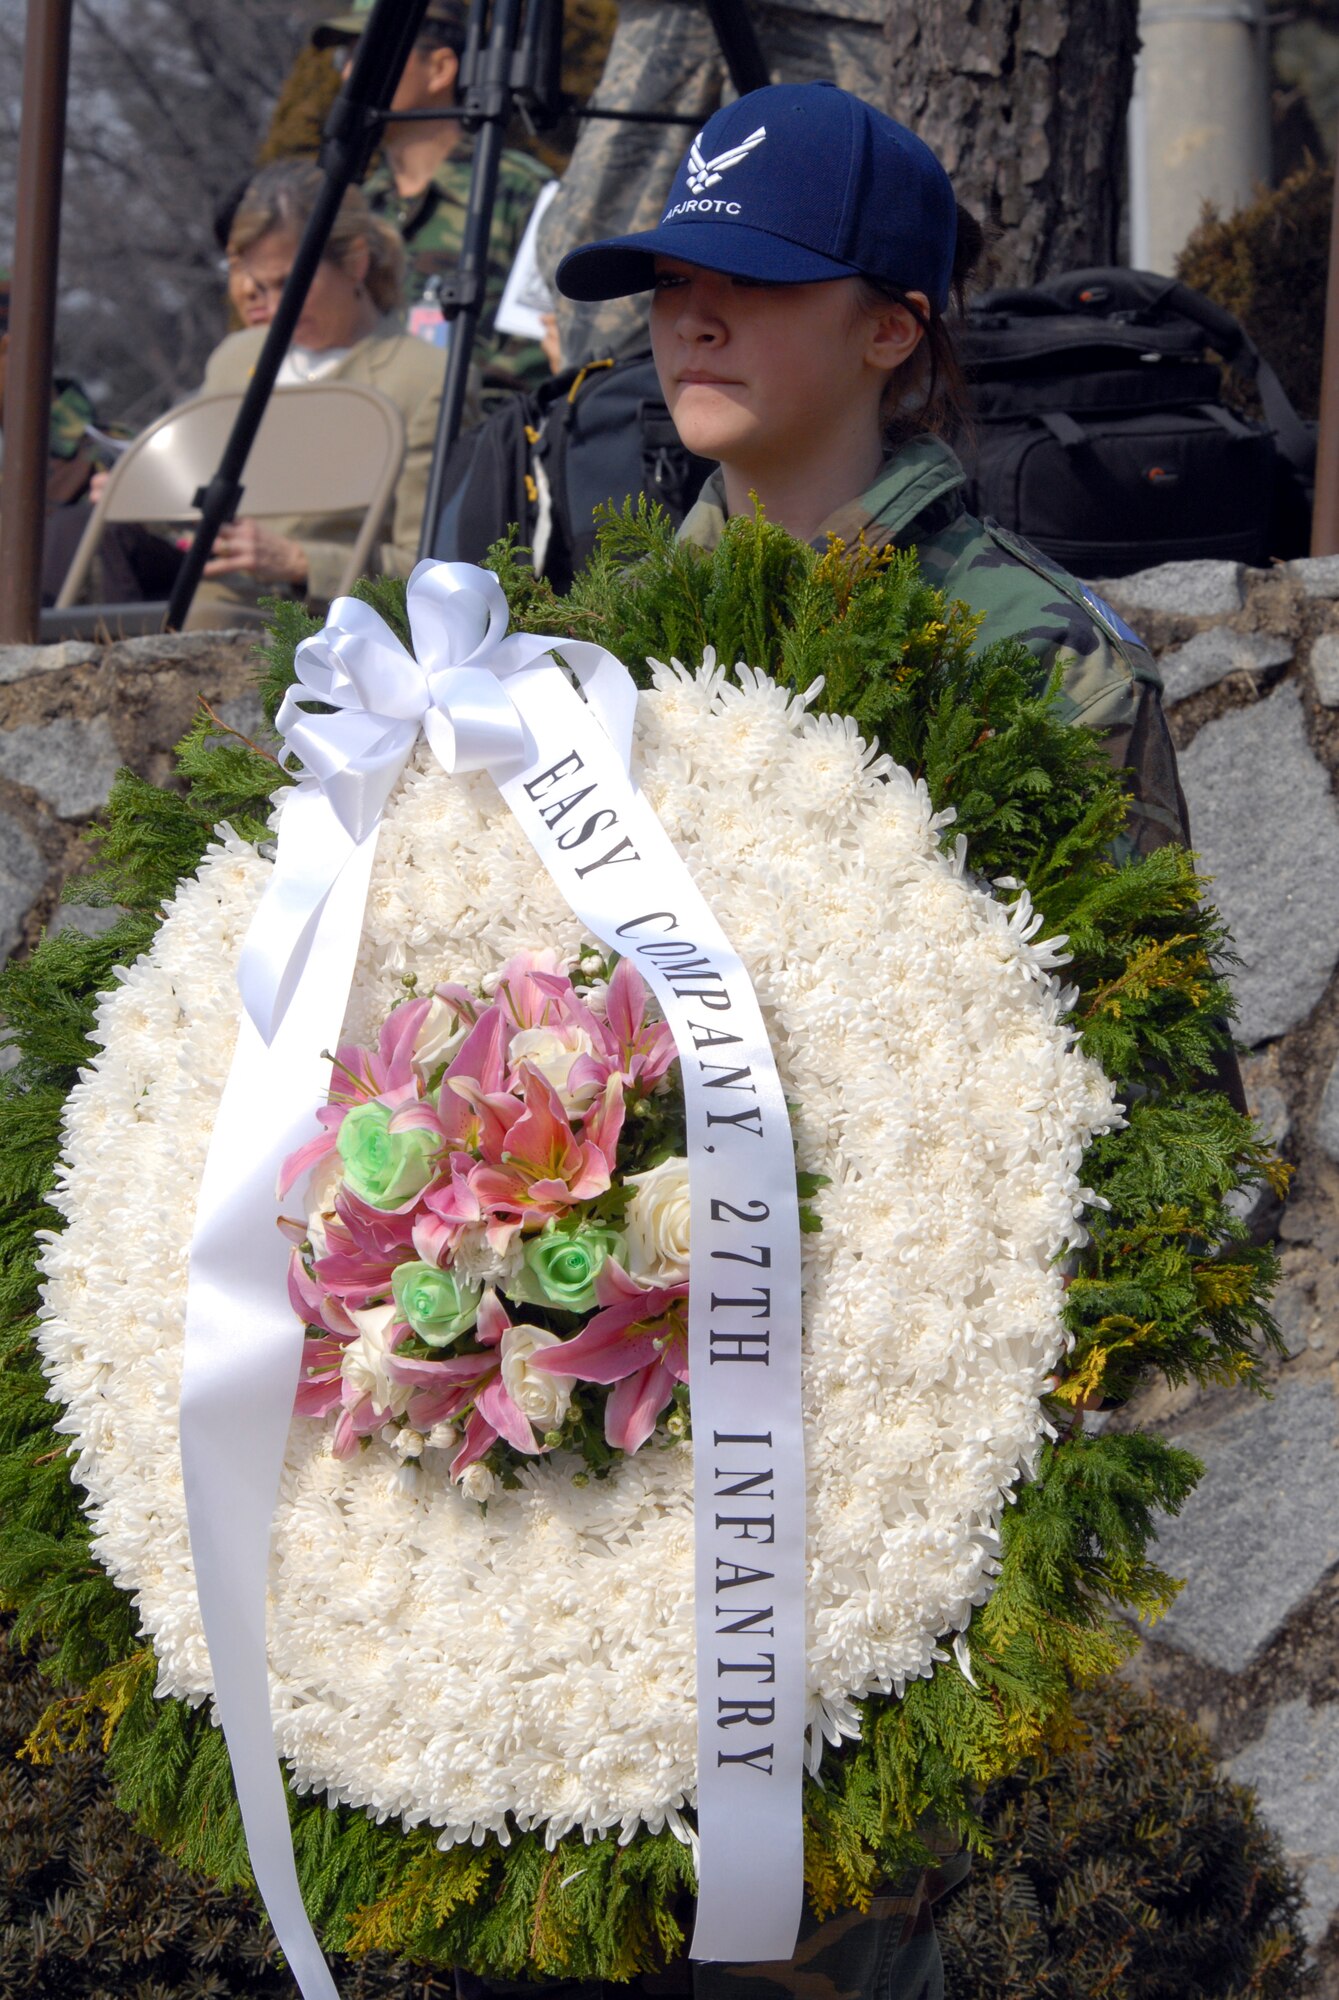 OSAN AIR BASE, Republic of Korea – A member of the Air Force Junior ROTC stands next to a memorial wreath during the Hill 180 remembrance ceremony Feb. 21. The ceremony also included a rifle salute by the United Nations Command Honor Guard, an  A-10/F-16 flyover and the playing of “Taps.” (U.S. Air Force photo/Staff Sgt. Lakisha Croley)